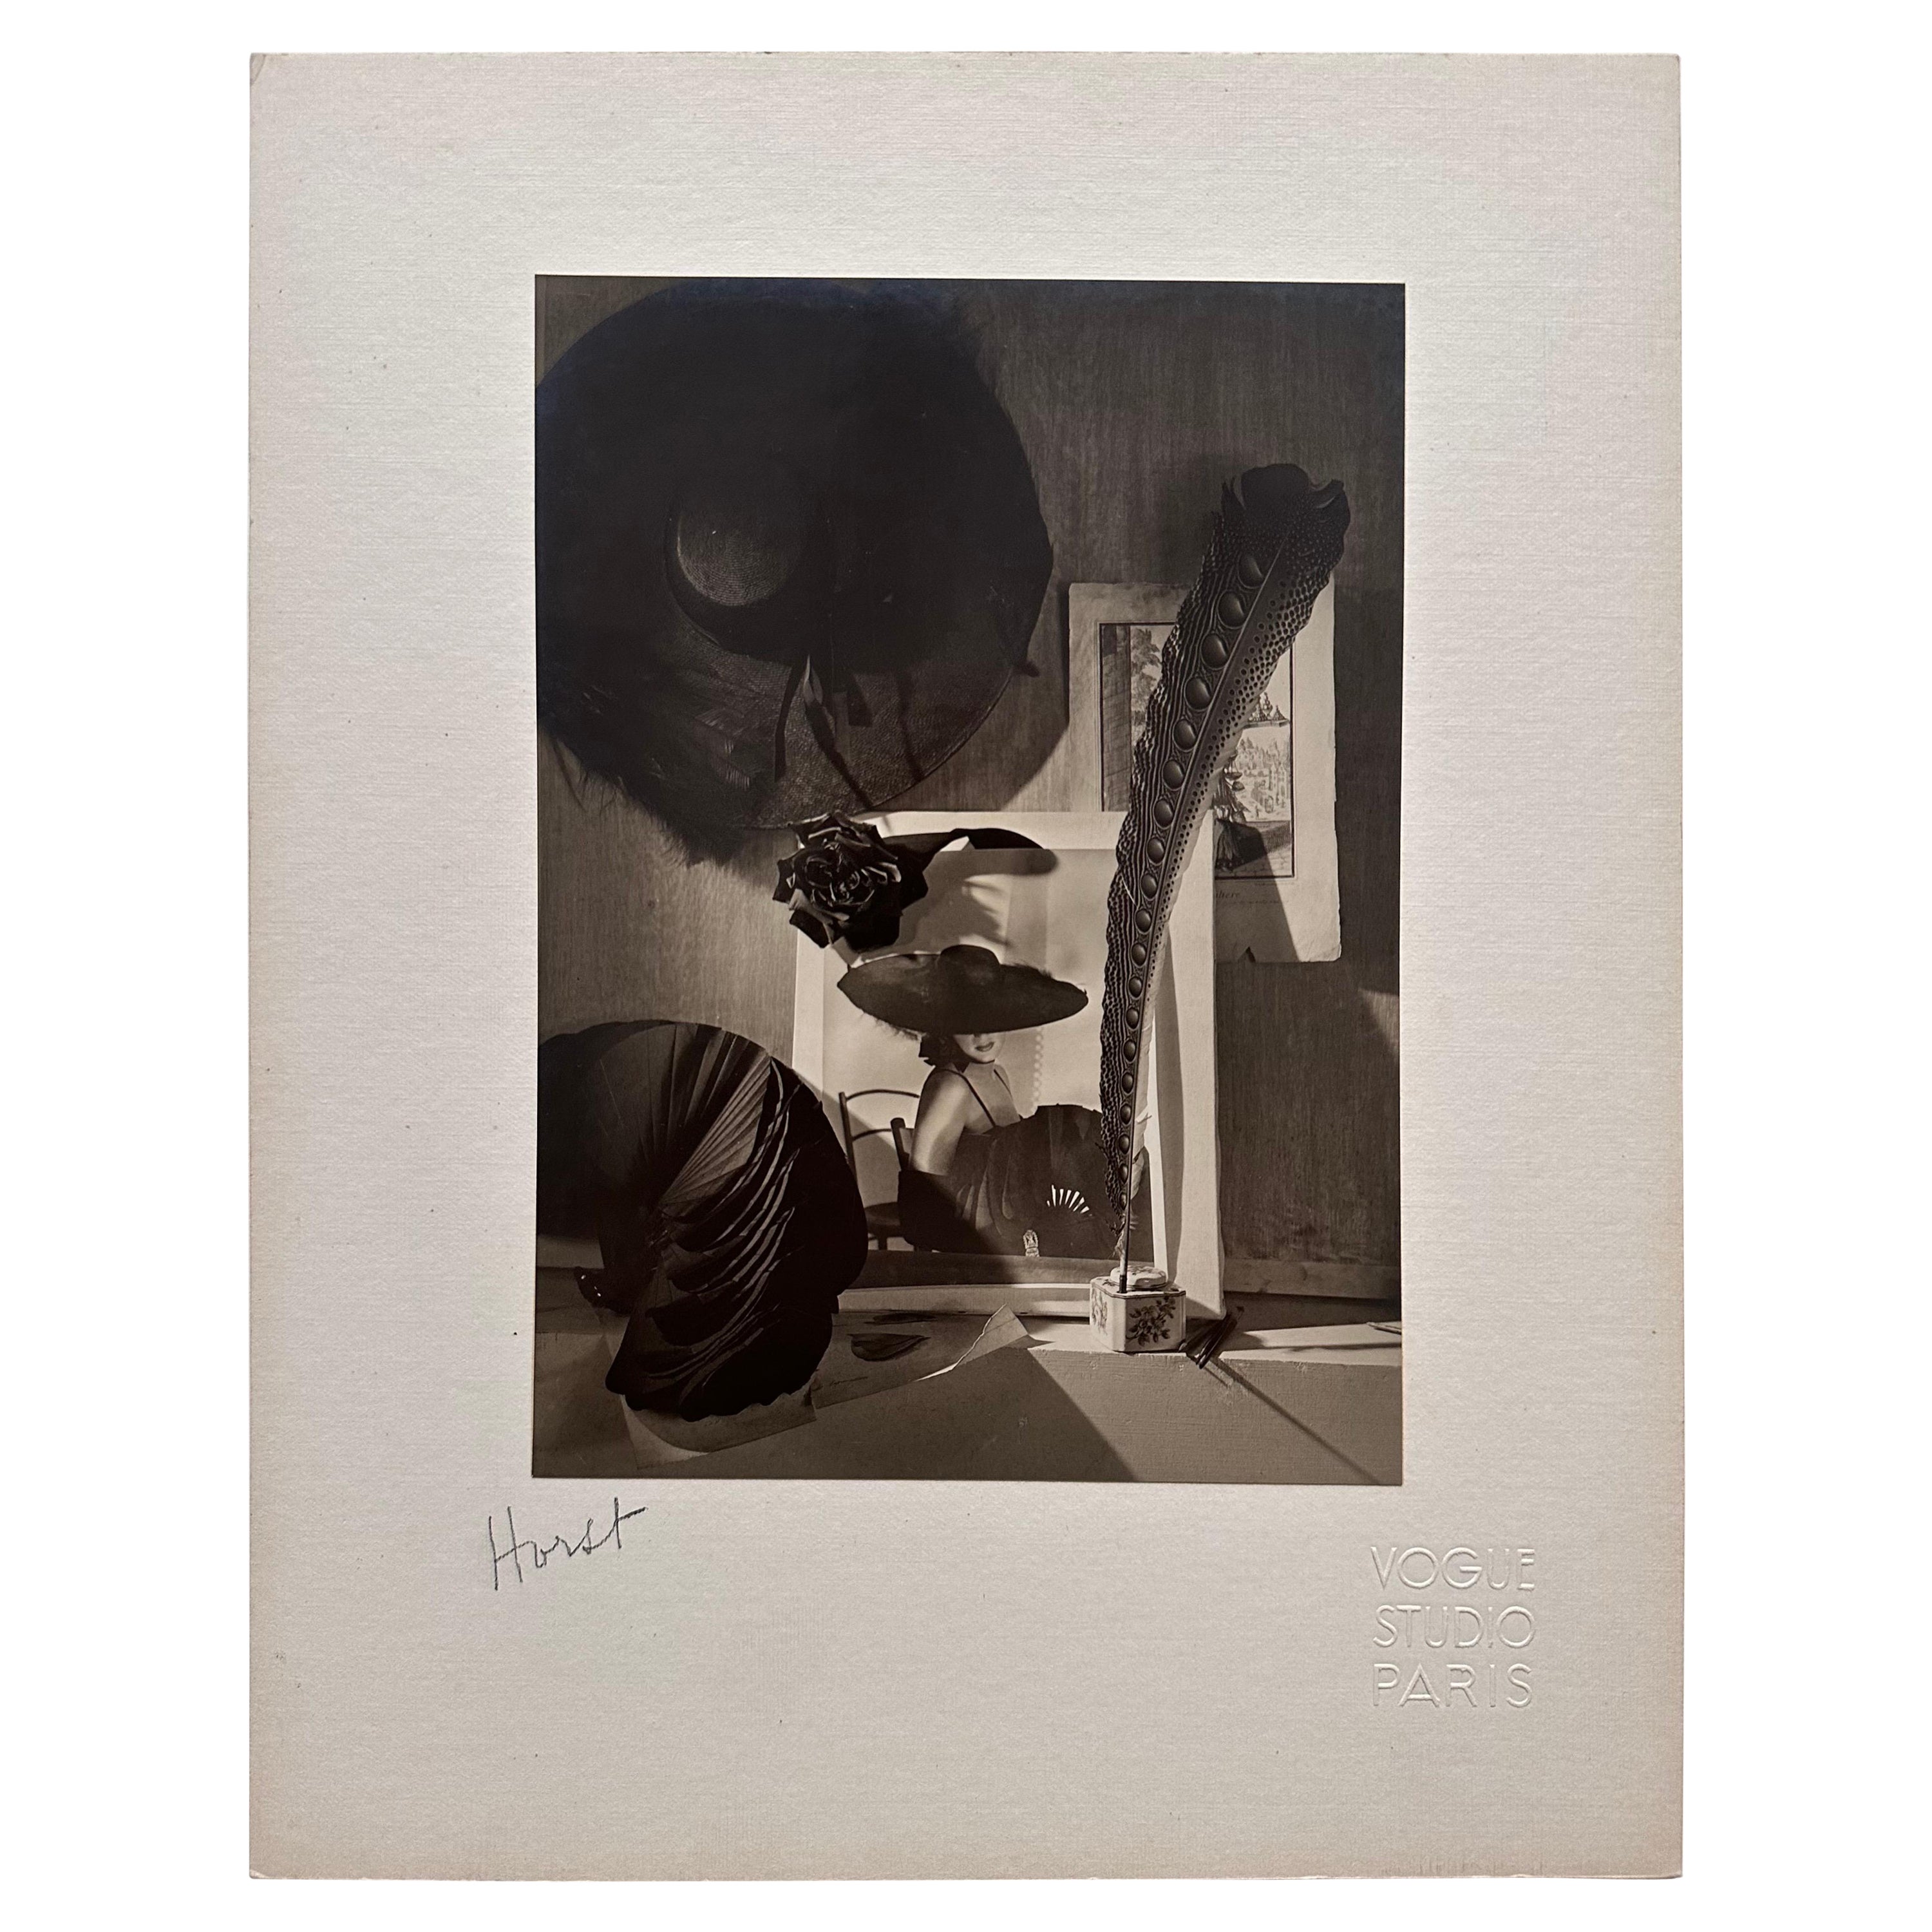 Horst P. Horst, Photograph, "Still Life with Photo", VOGUE, 1938, Signed